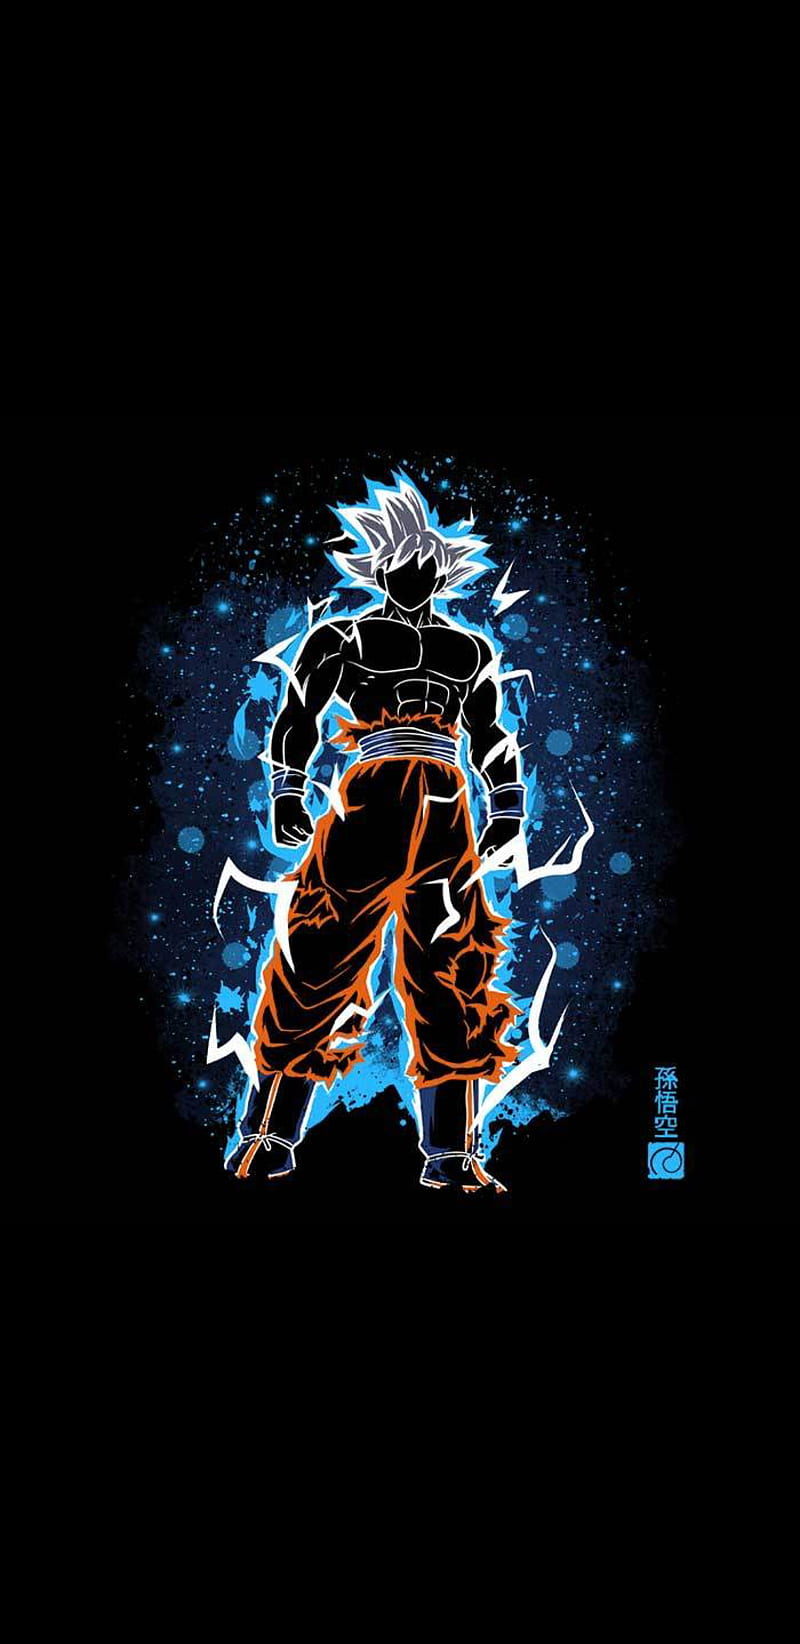 Goku Drip Drip Goku Sticker  Goku Drip Drip Goku Drip  Discover  Share  GIFs